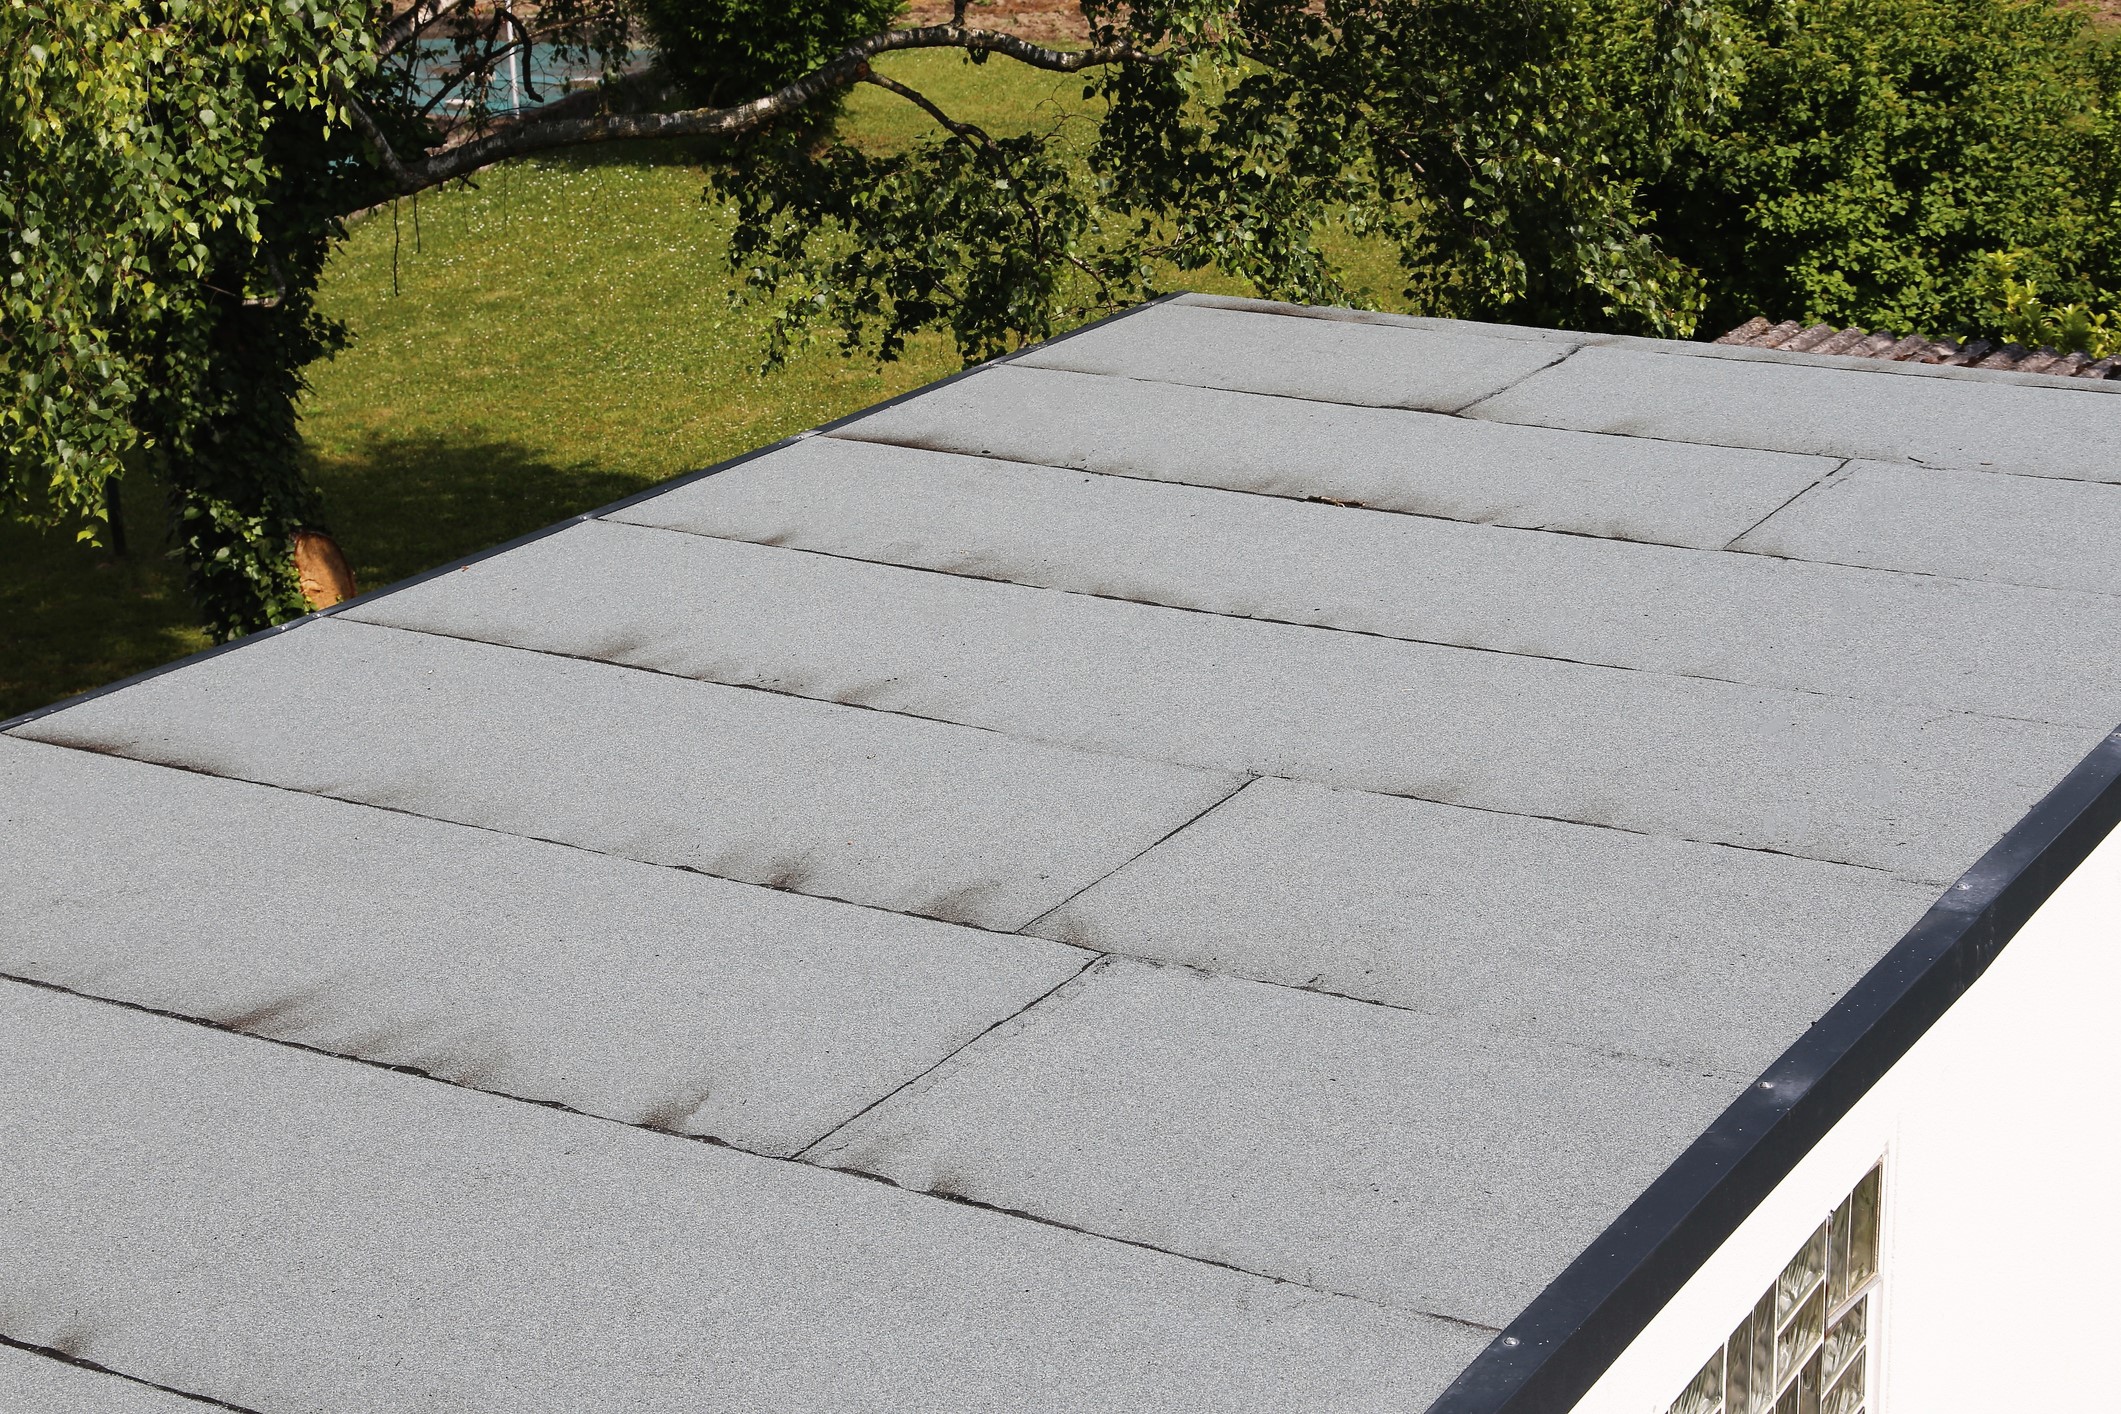 6 Benefits of Built-Up Roofing Systems - Ventura Roofing Company